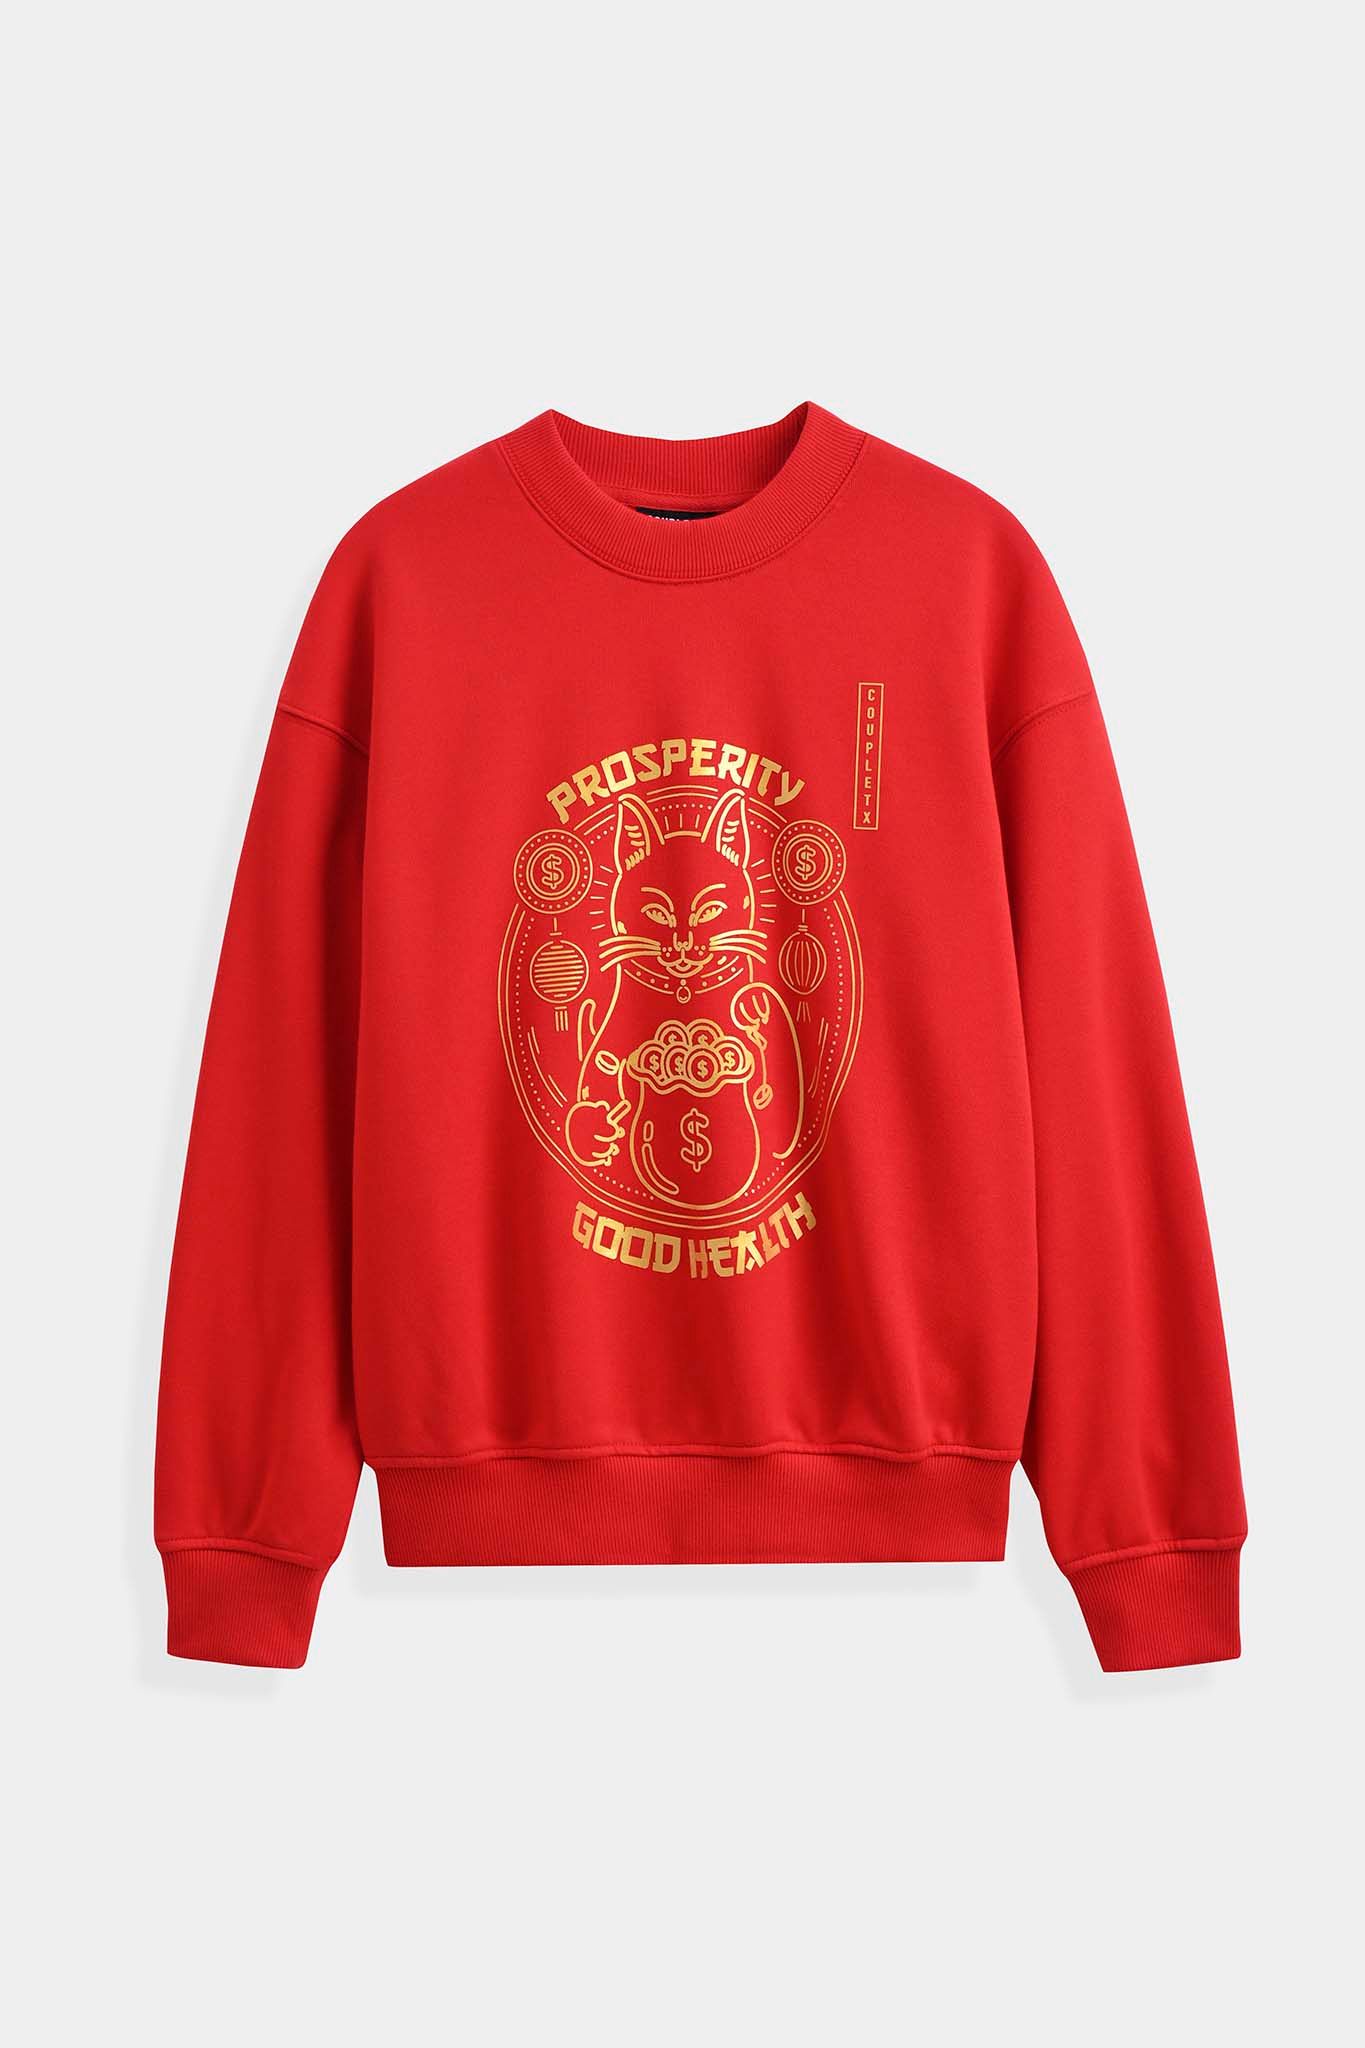 Áo Sweater Nữ Oversize In Graphics Mèo May Mắn WSW 2019 - 